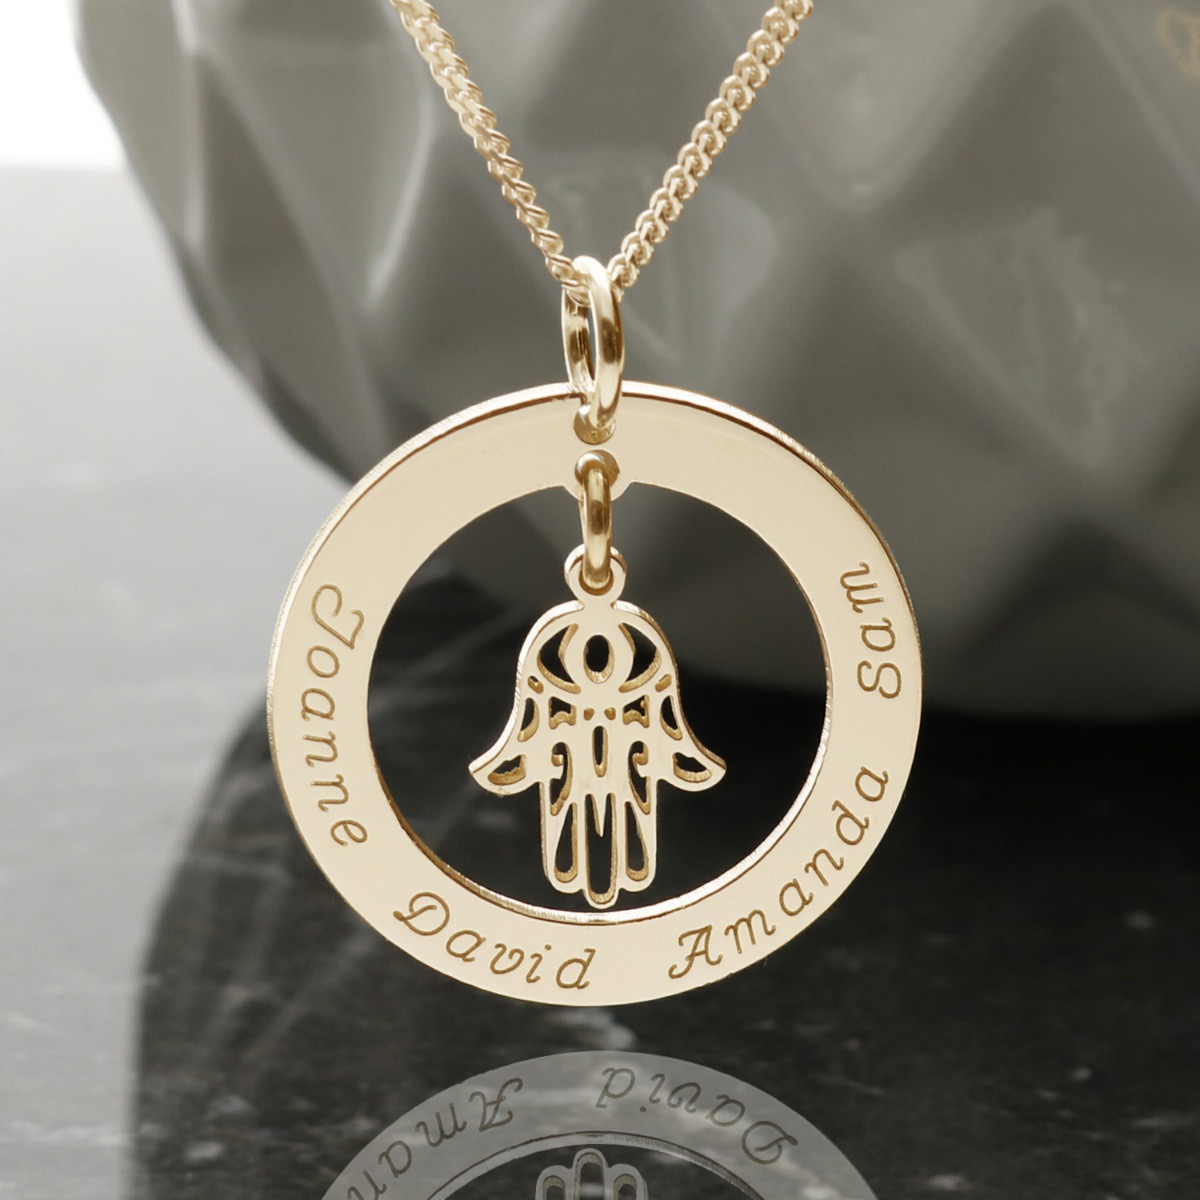 9ct Yellow Gold Plated Personalised Disc With Hanging Hamsa Hand Of Fatima Pendant Necklace